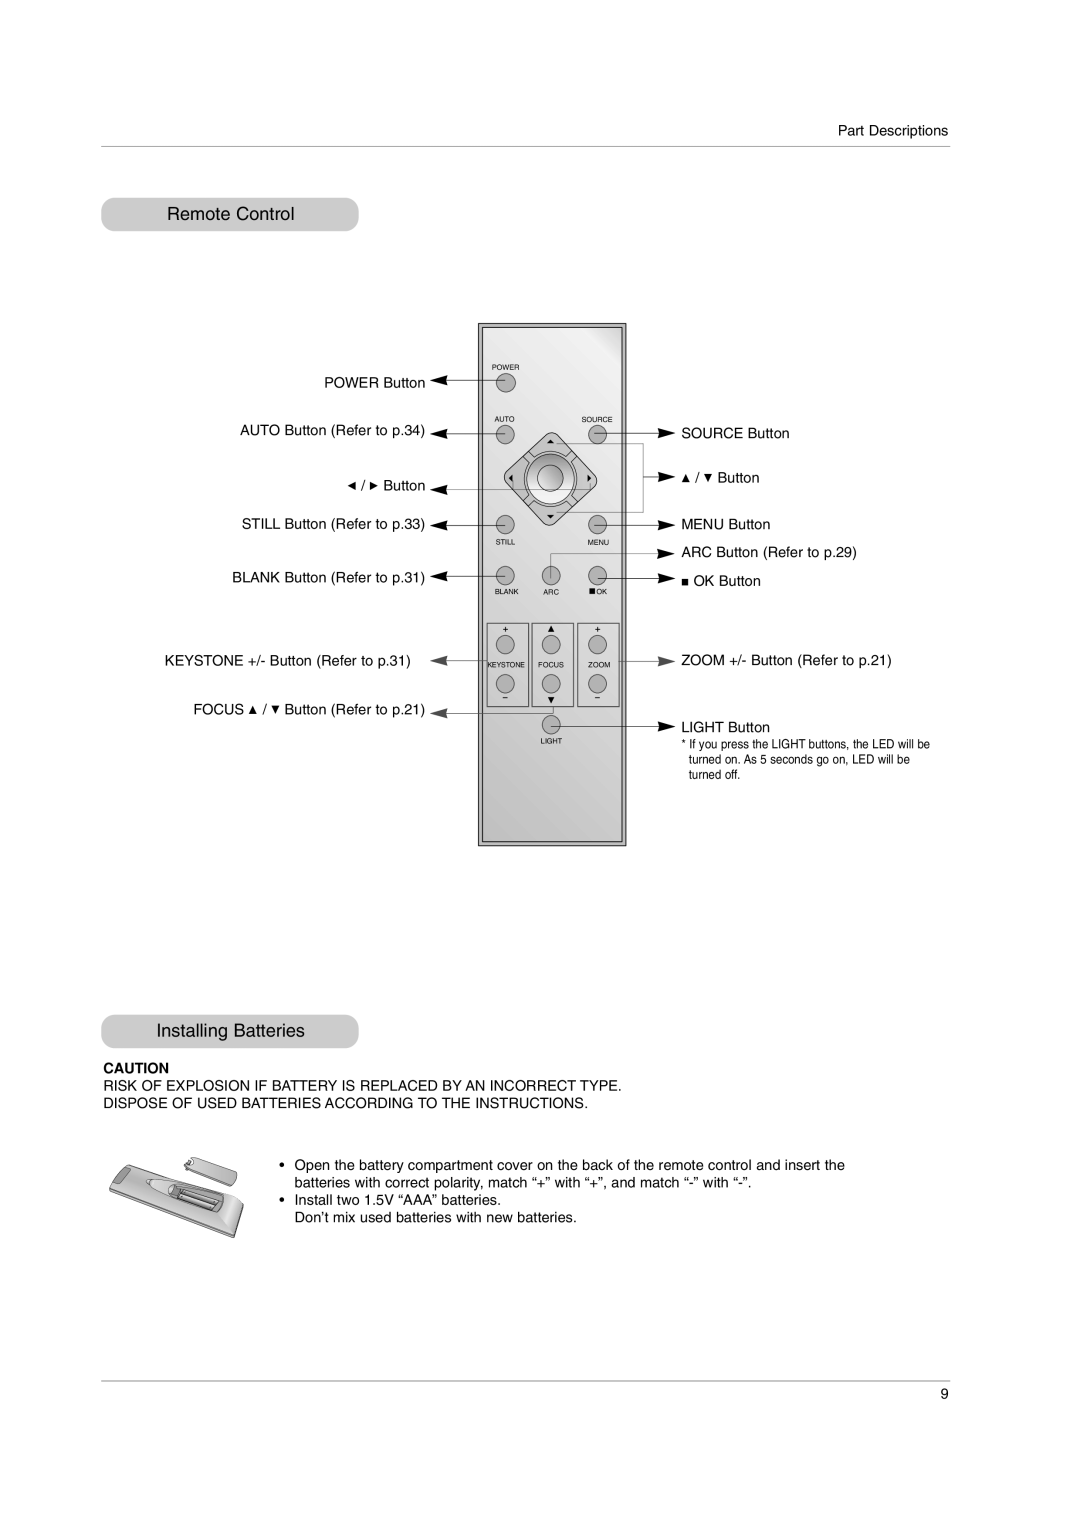 LG Electronics AN110B-JD, AN110W-JD owner manual Remote Control, Installing Batteries, turned off 